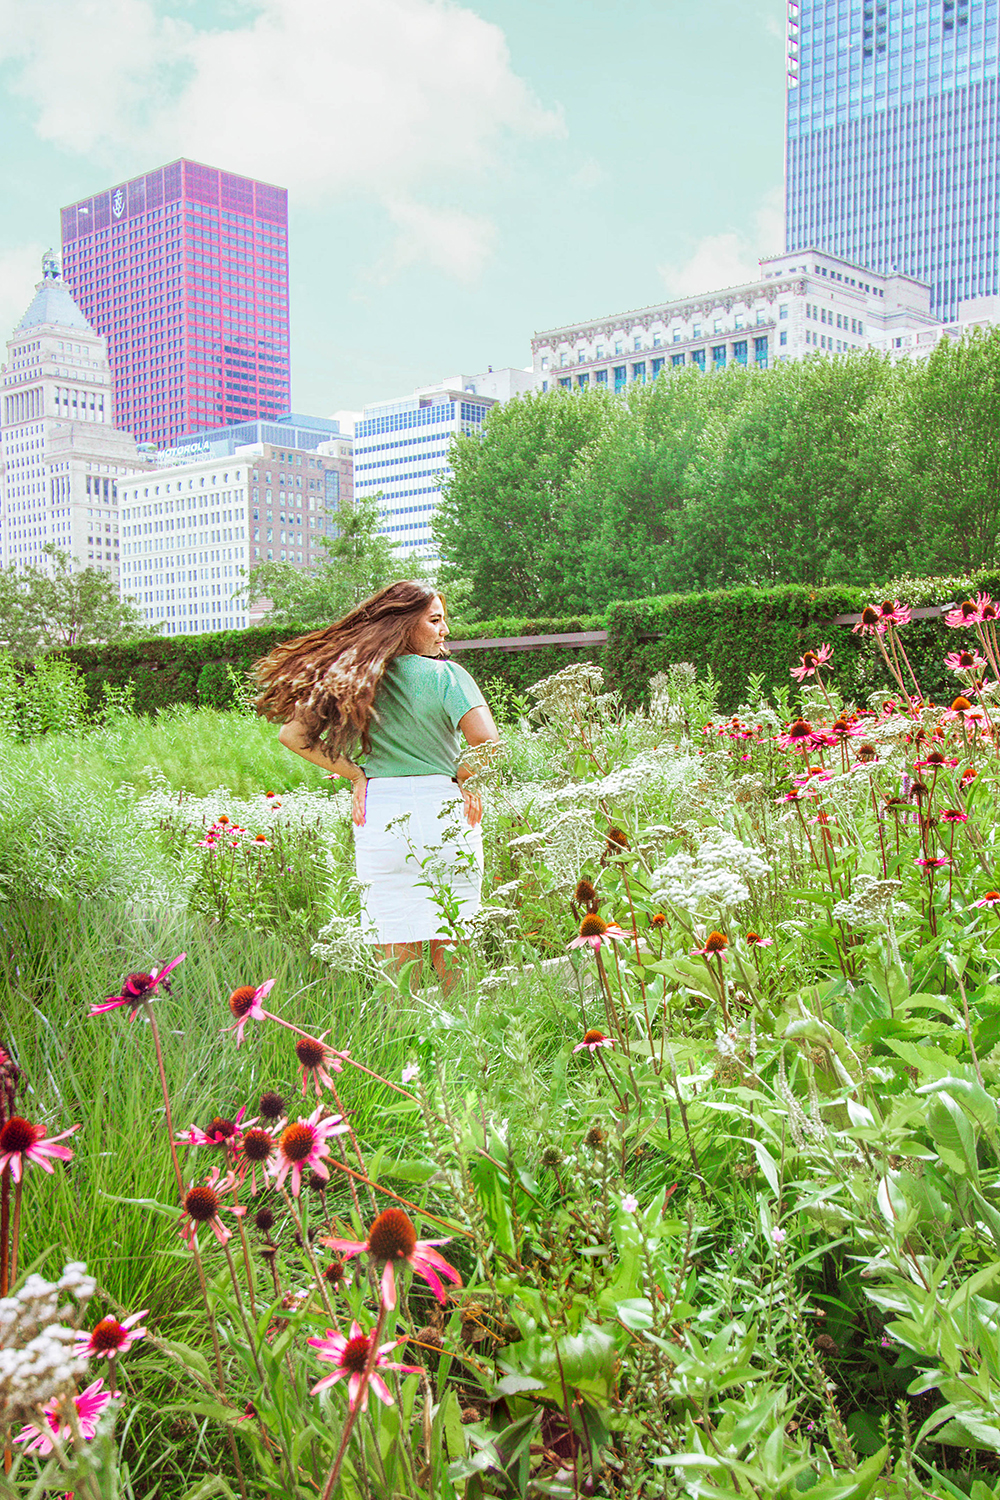 Midsize fashion and style blogger flips her hair in Lurie Garden near flowers with the cityscape behind her